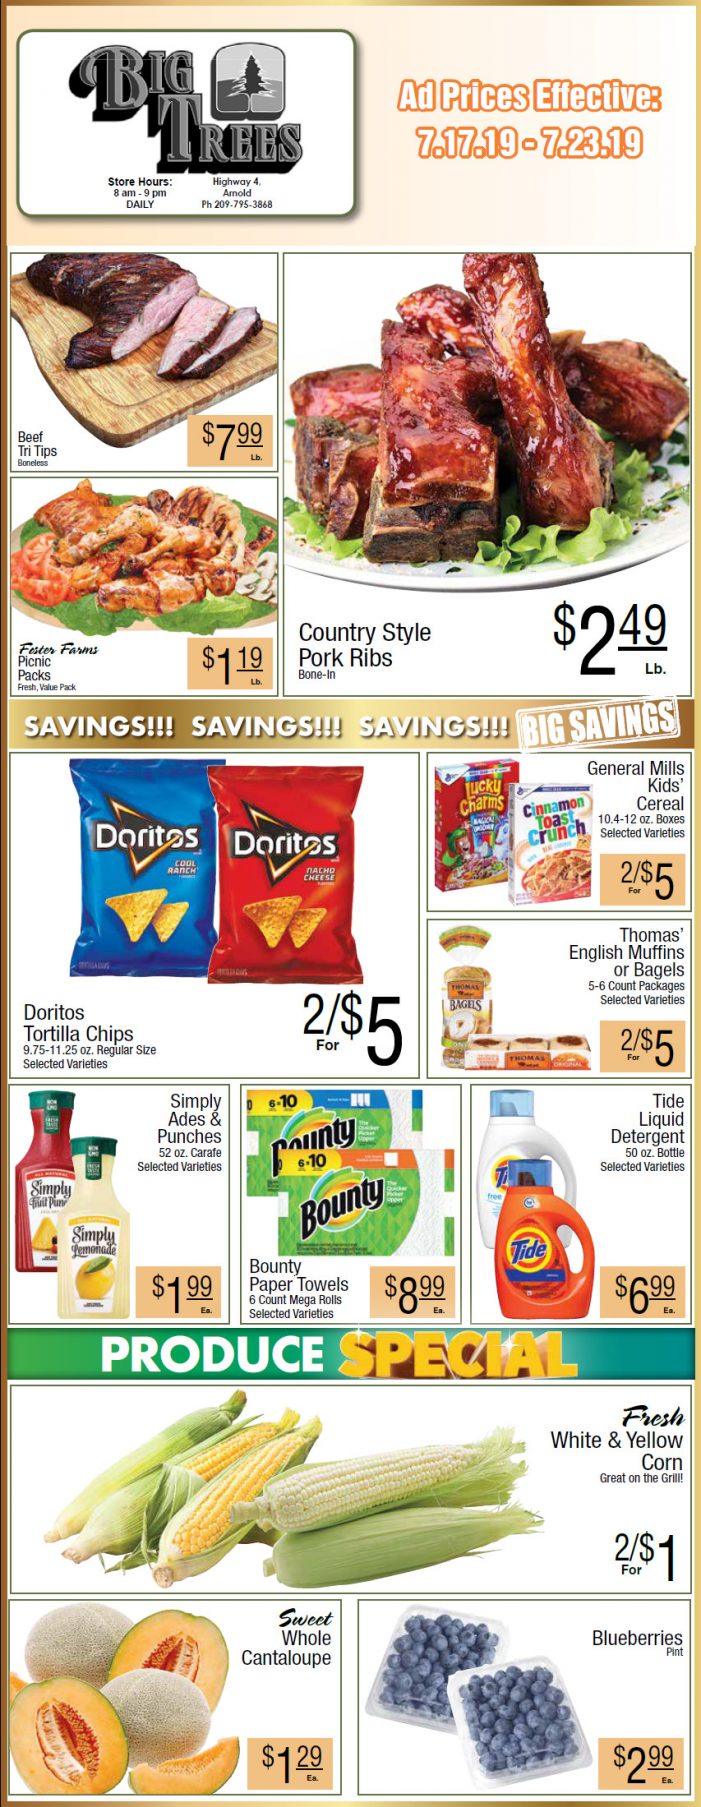 Big Trees Market Weekly Ad & Grocery Specials Through July 23rd